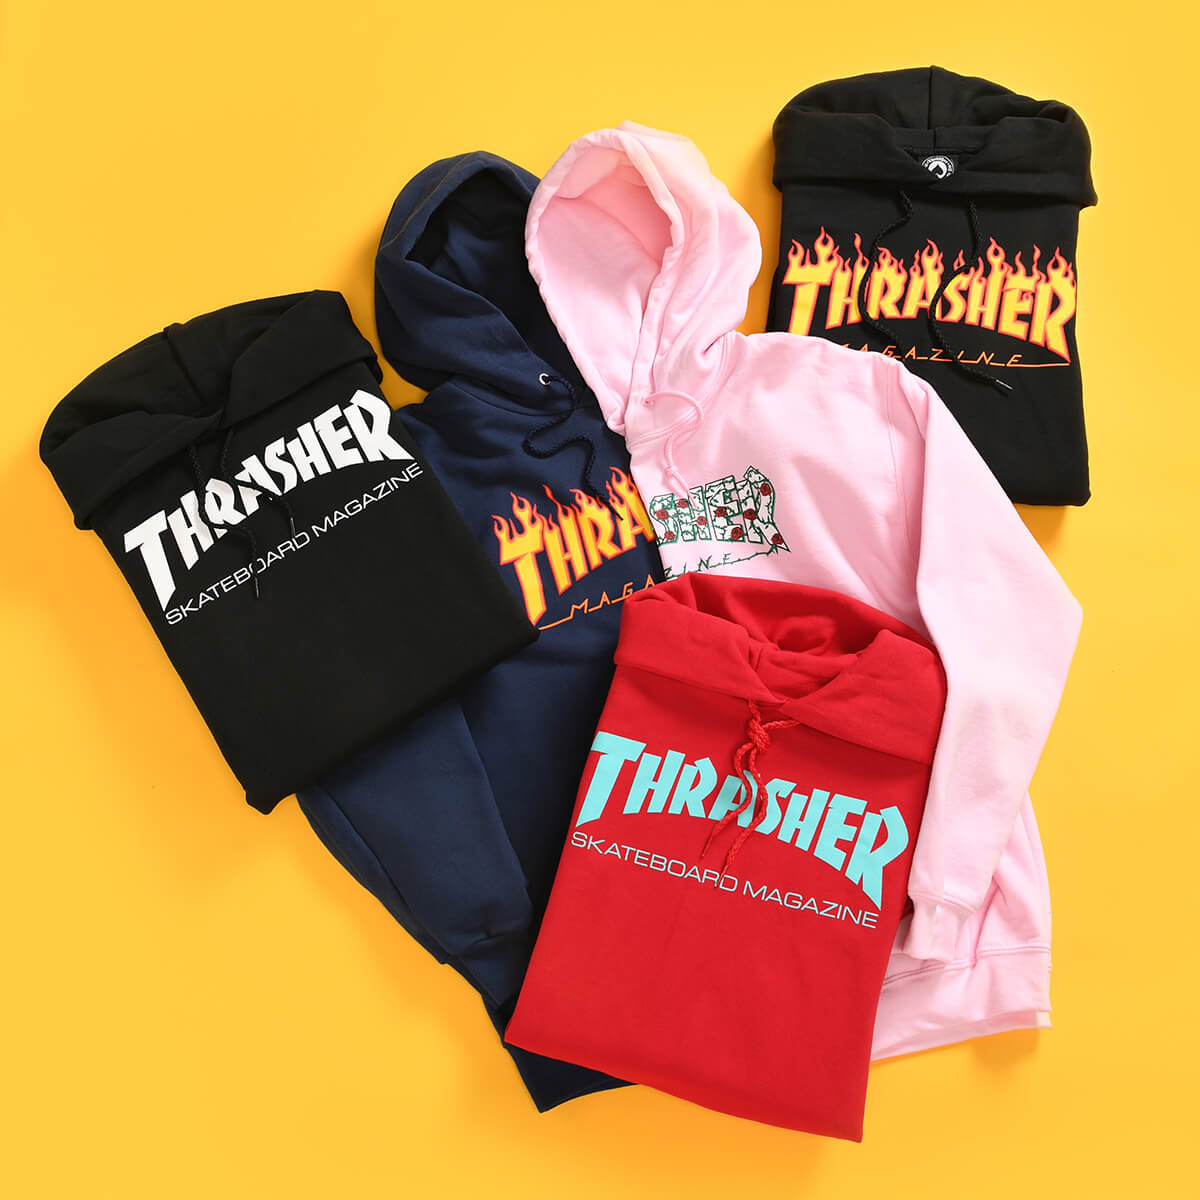 MEN'S NEW ARRIVAL HOODIES FROM THRASHER AND MORE - SHOP NOW